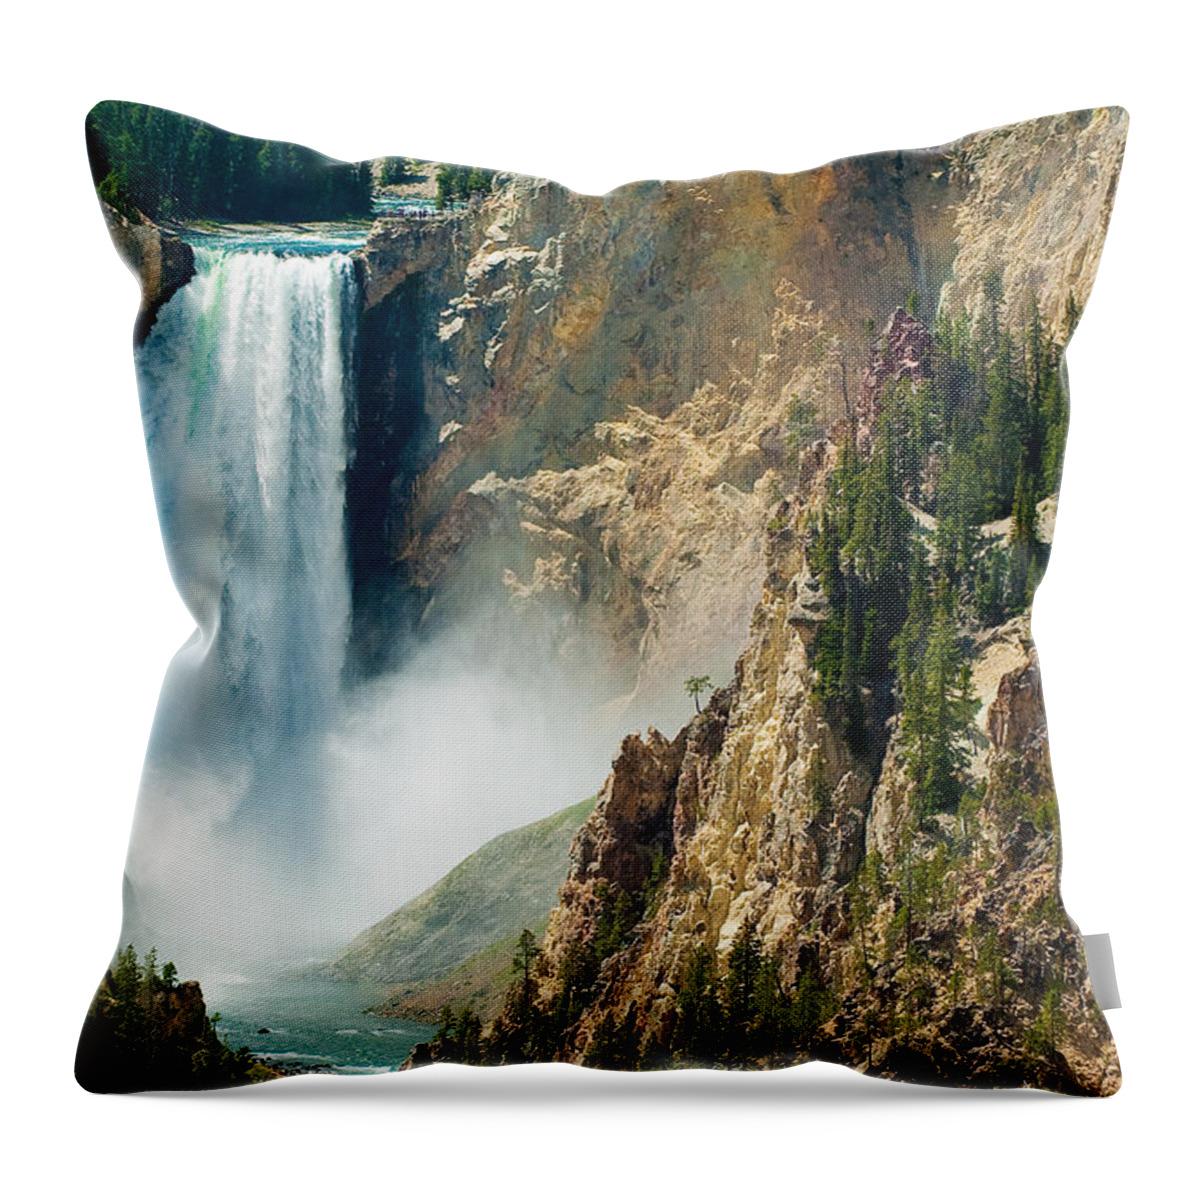 Yellowstone Throw Pillow featuring the photograph Yellowstone Waterfalls #1 by Sebastian Musial